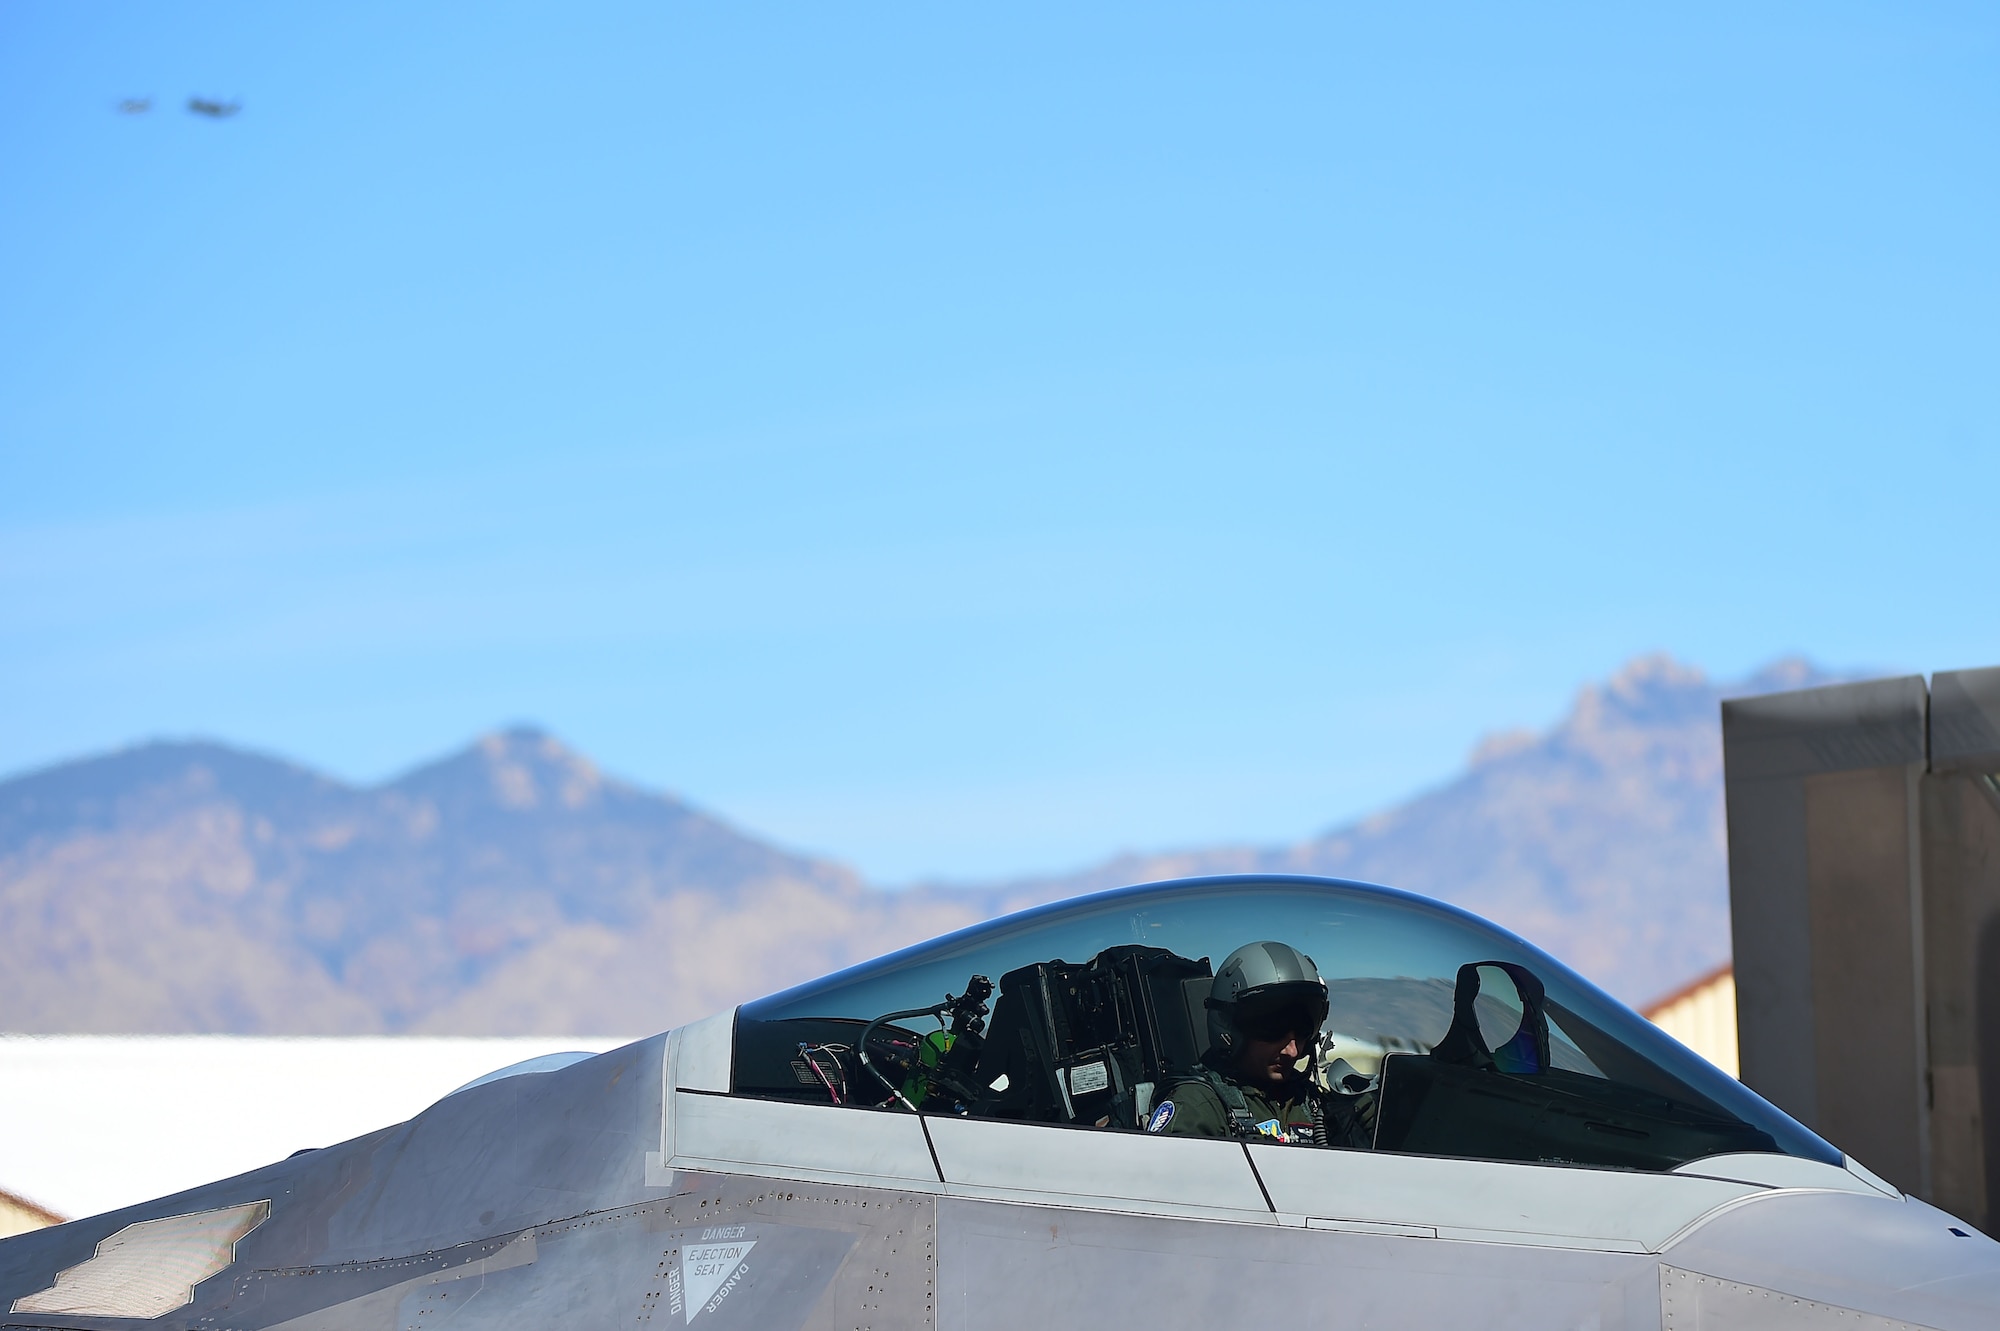 U.S. Air Force Maj. Dan Dickinson, F-22 Raptor Demonstration Team pilot, prepares for flight during the 2017 Heritage Flight Training and Certification Course Davis-Monthan Air Force Base, Ariz., Feb. 10, 2017. Dickinson is the only certified F-22 Raptor Demonstration Team pilot, who is part of the 12-man team that performs all over the world. (U.S. Air Force photo by Senior Airman Kimberly Nagle)